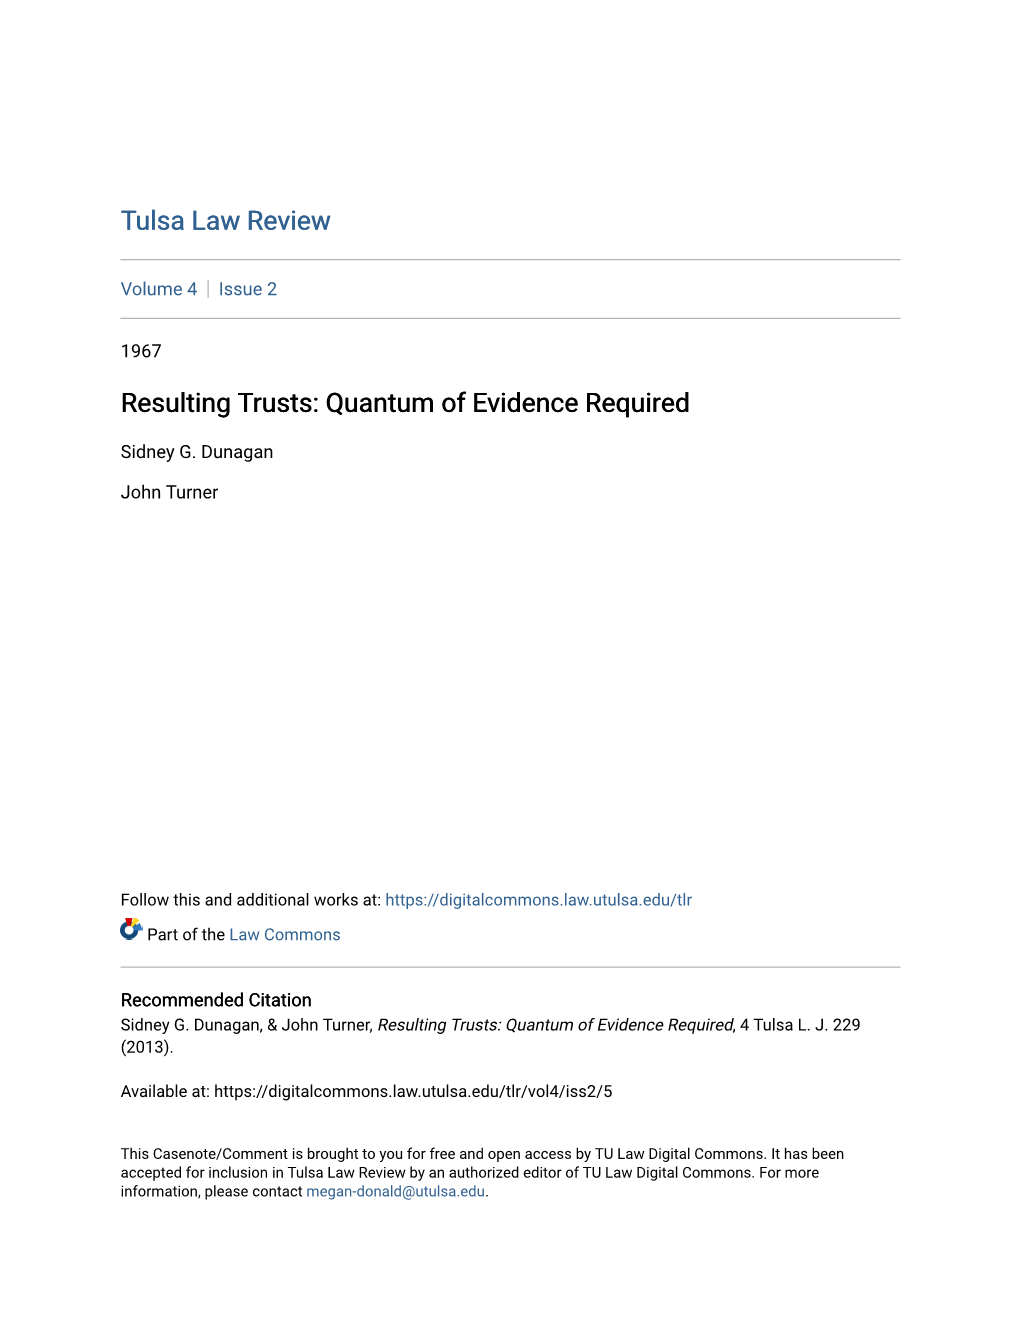 Resulting Trusts: Quantum of Evidence Required